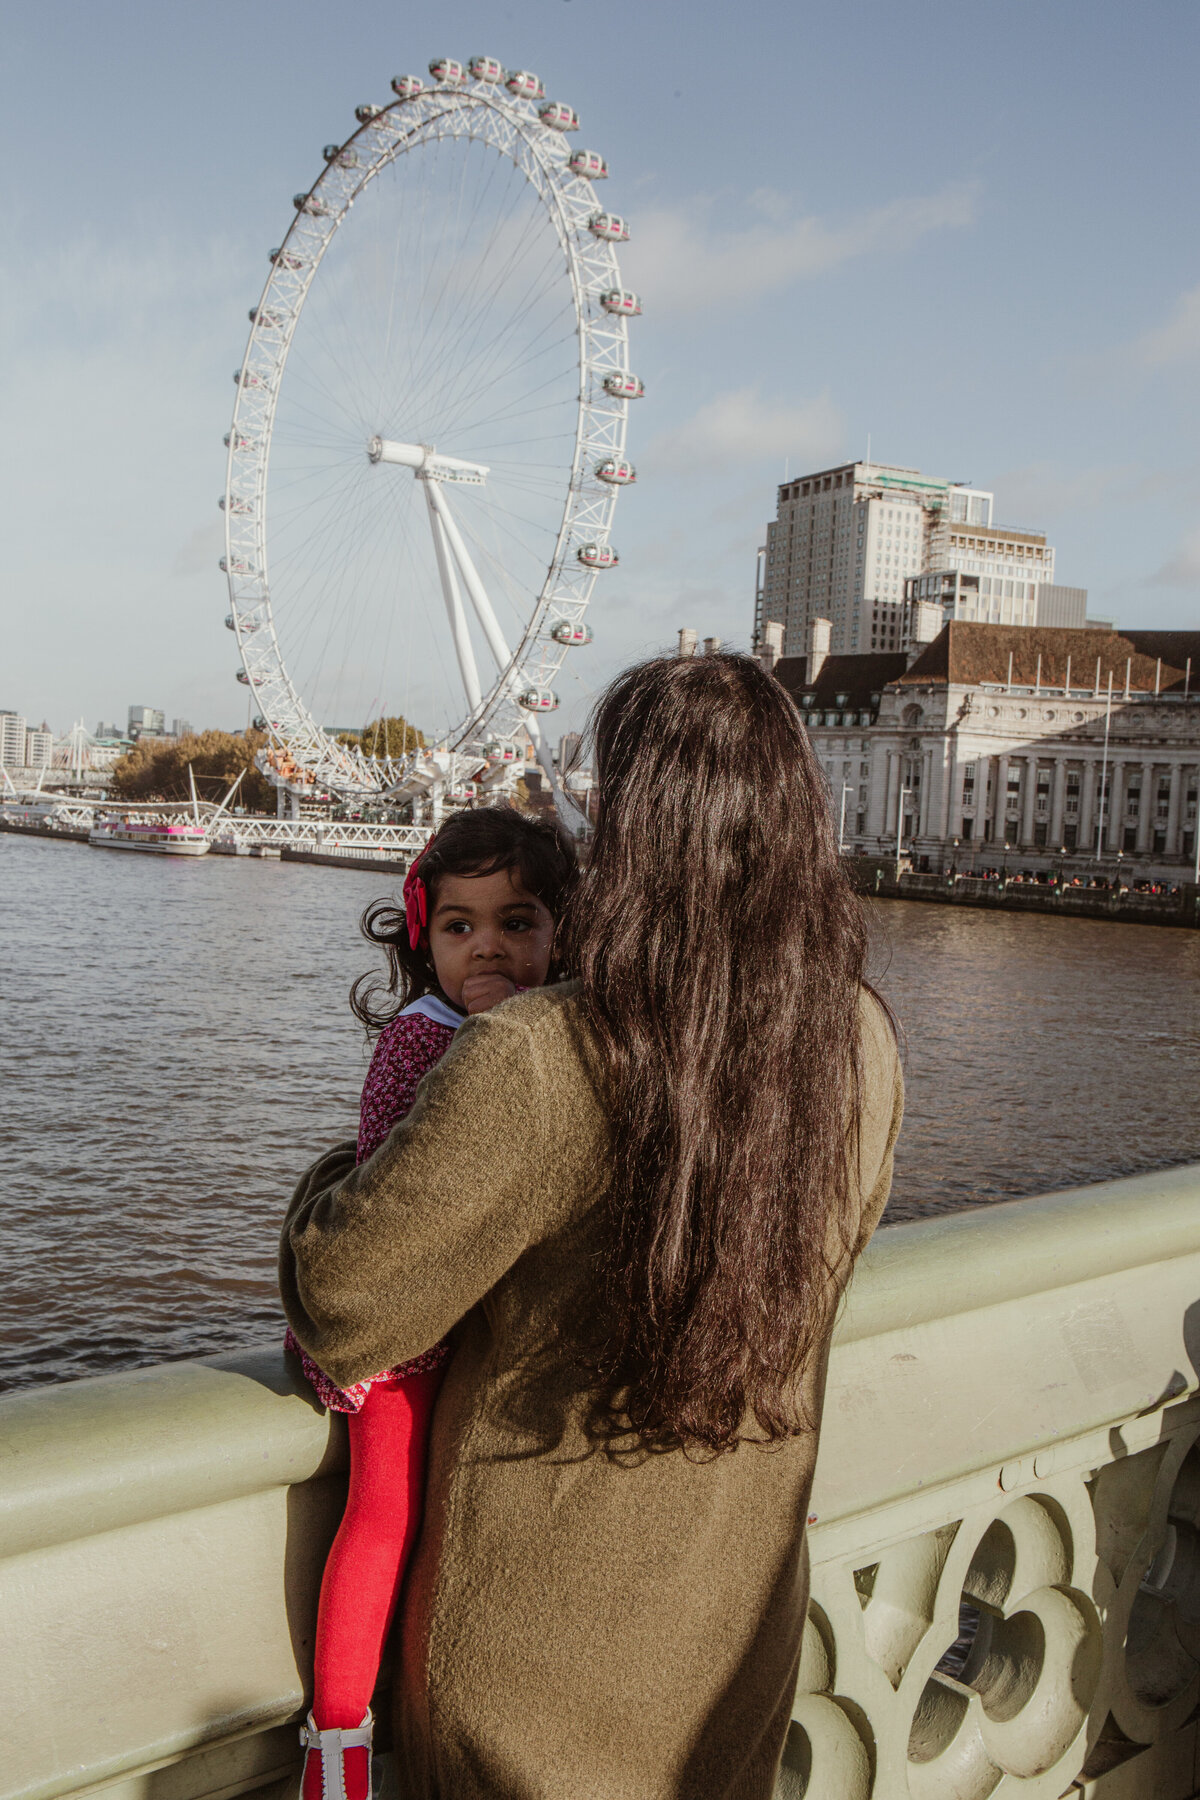 Perfect day sight seeing in London for this family photoshoot